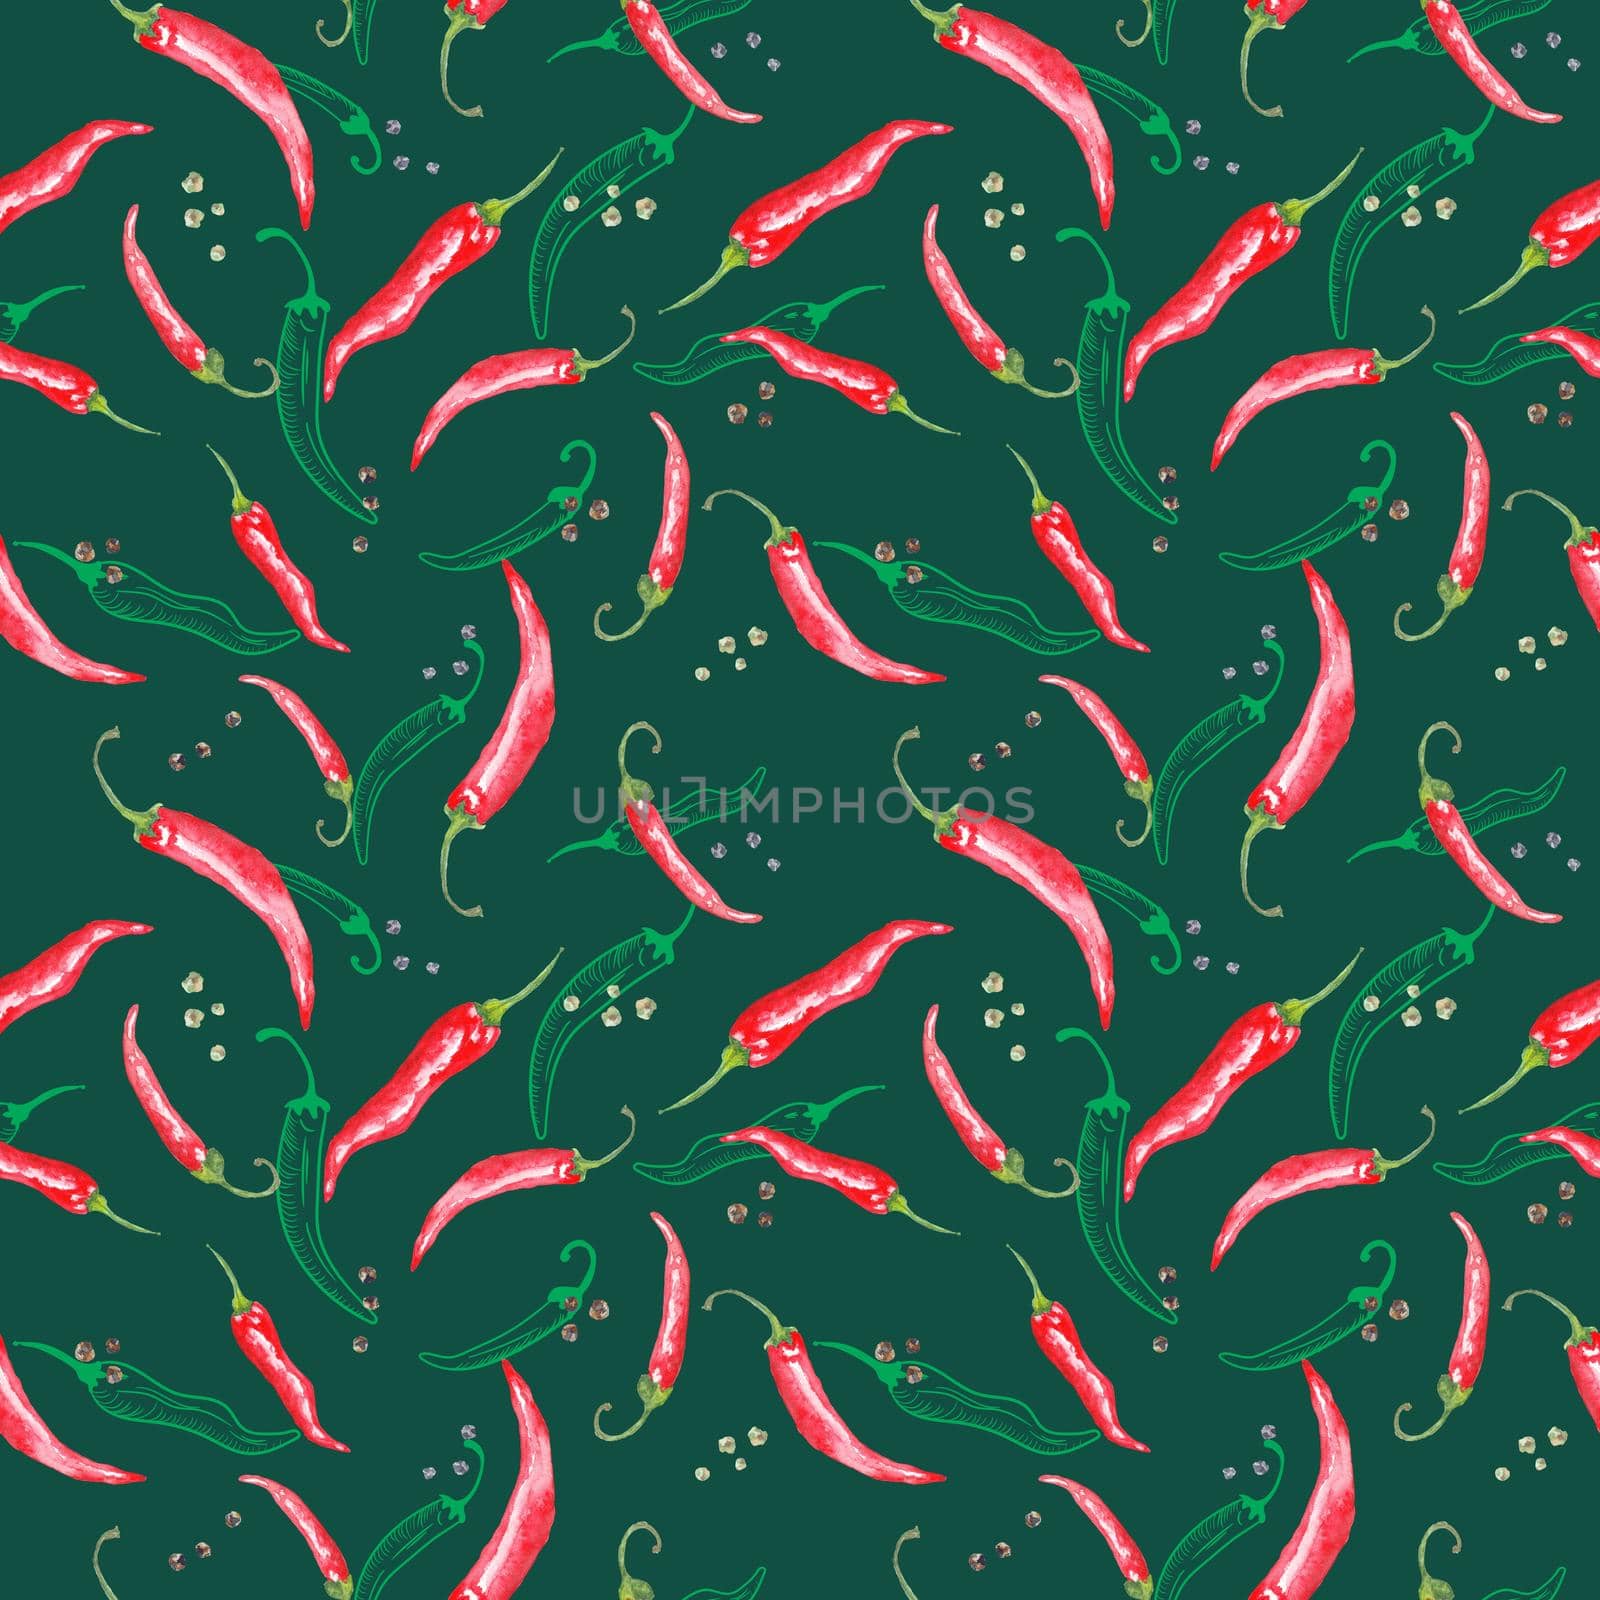 Hot chilli pepper hand painted watercolor pattern by kisika